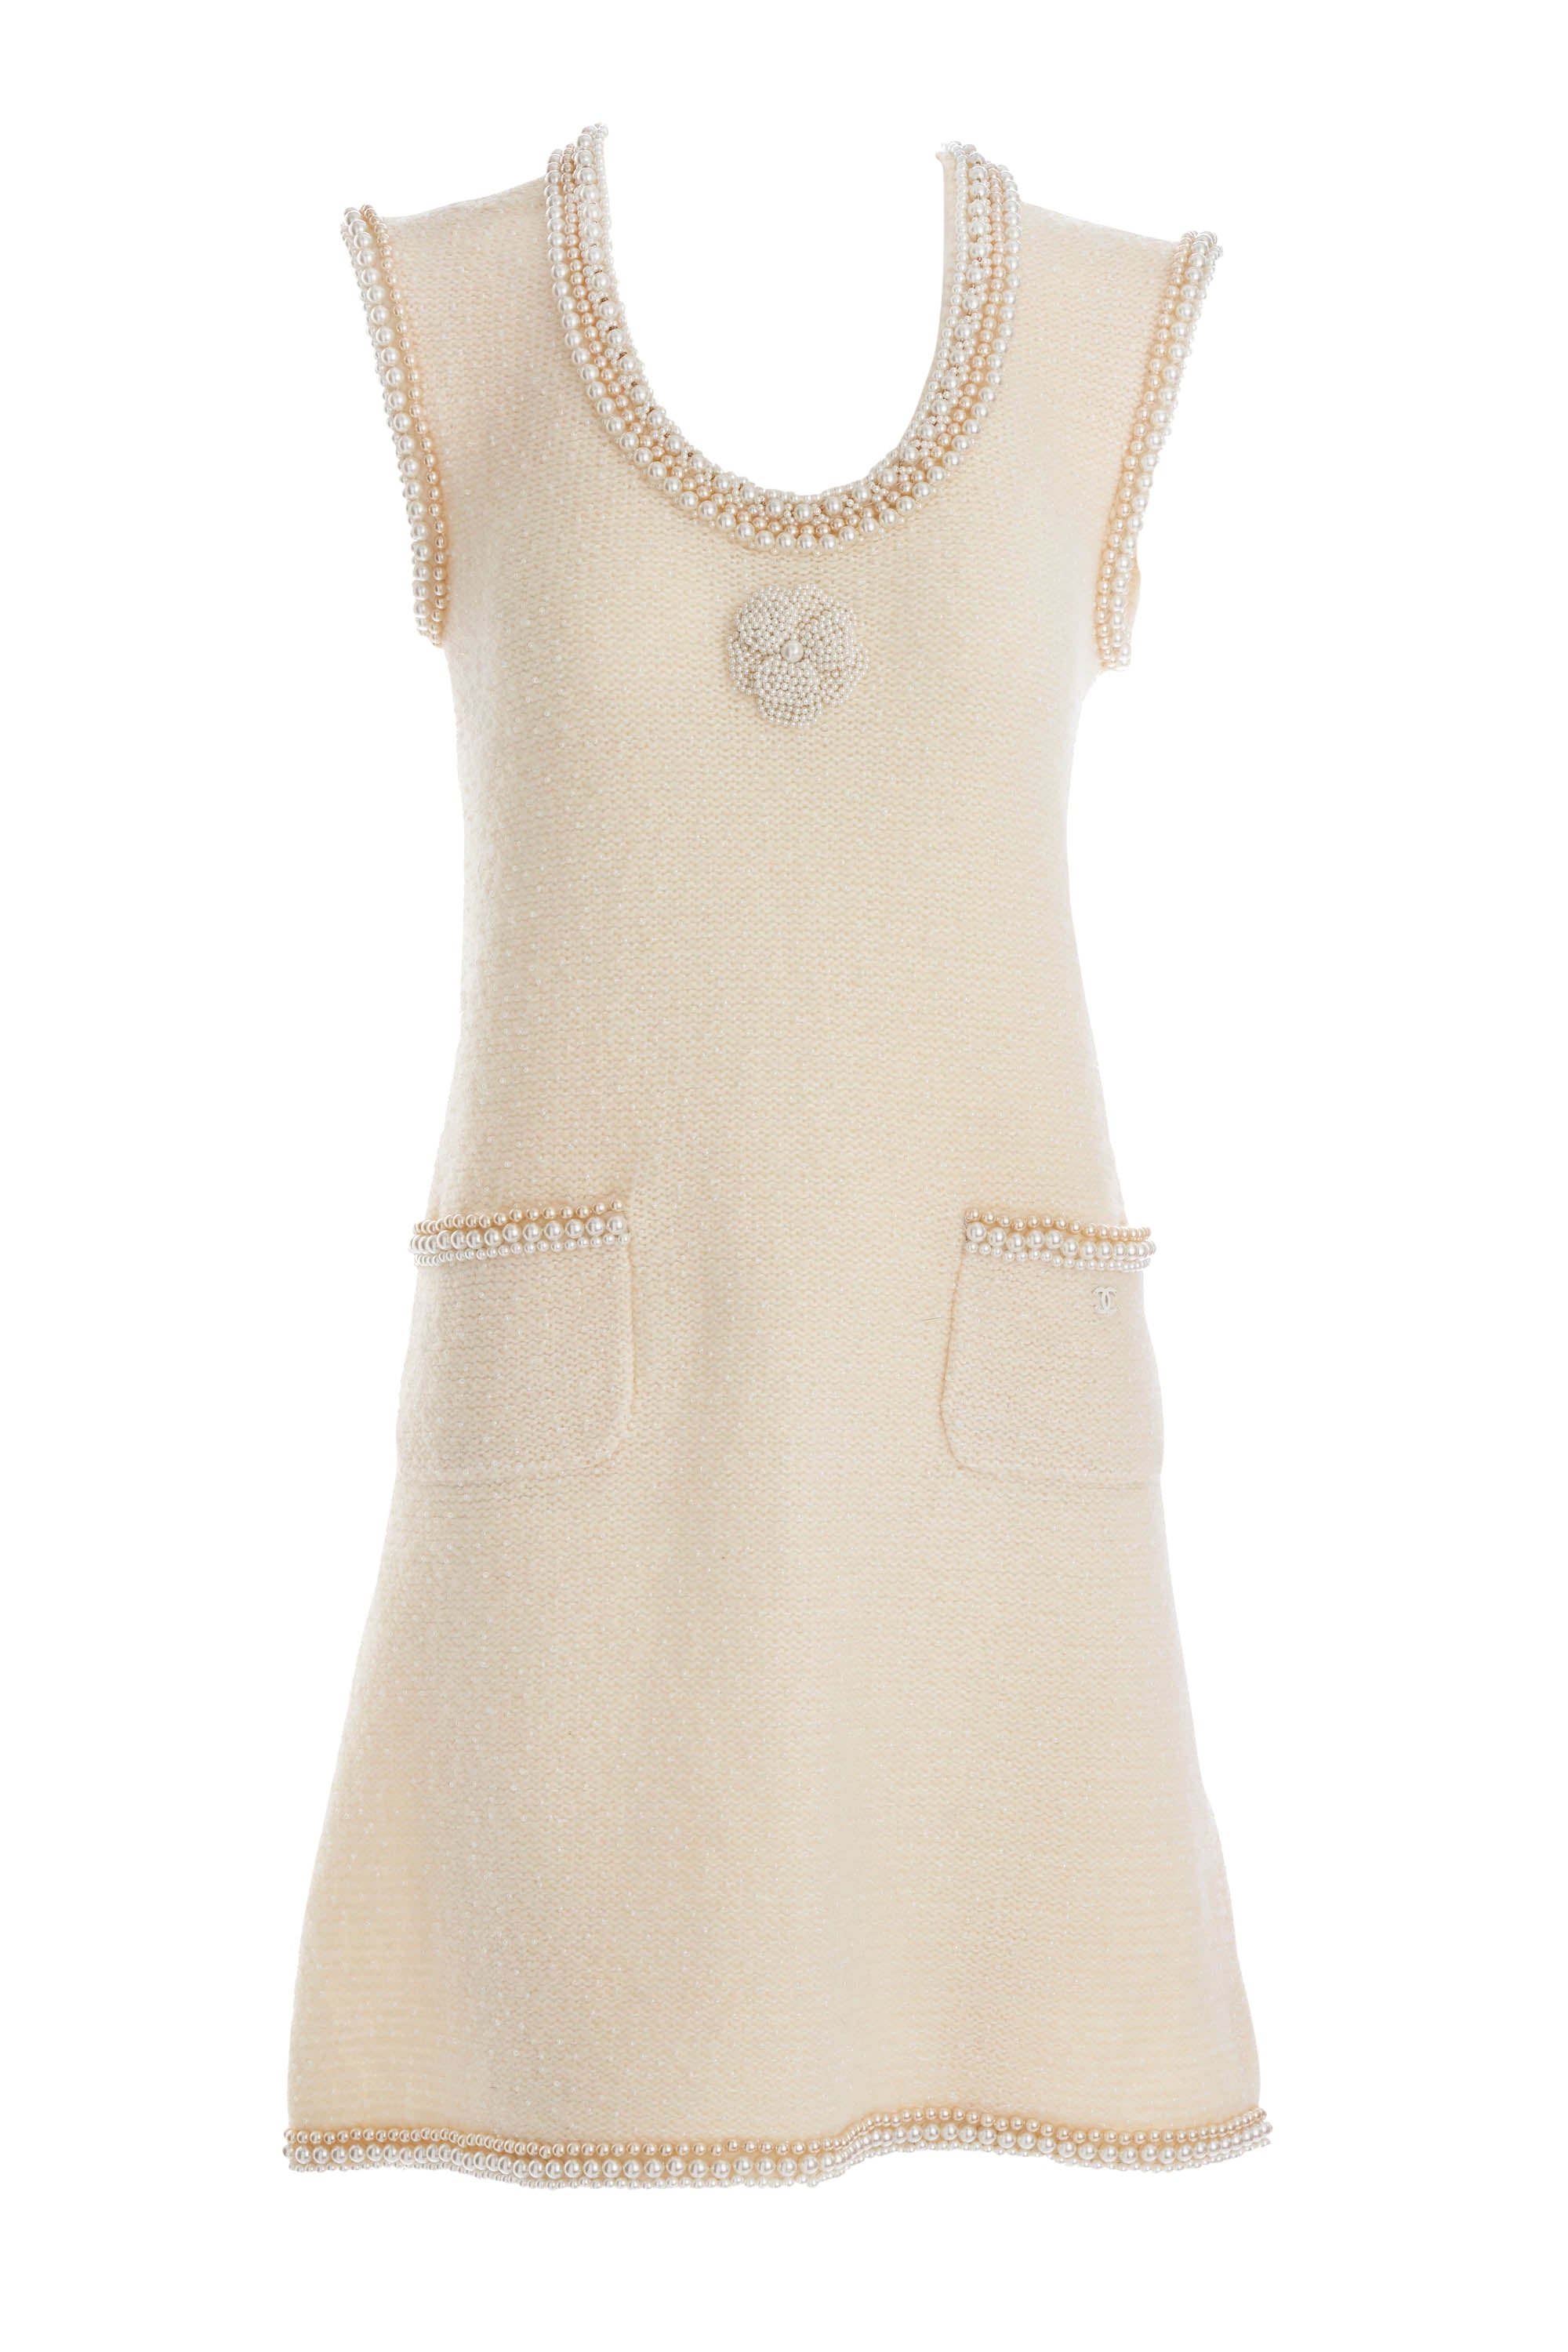 Chanel White Camelia and Pearl Sleeveless Dress Size 36